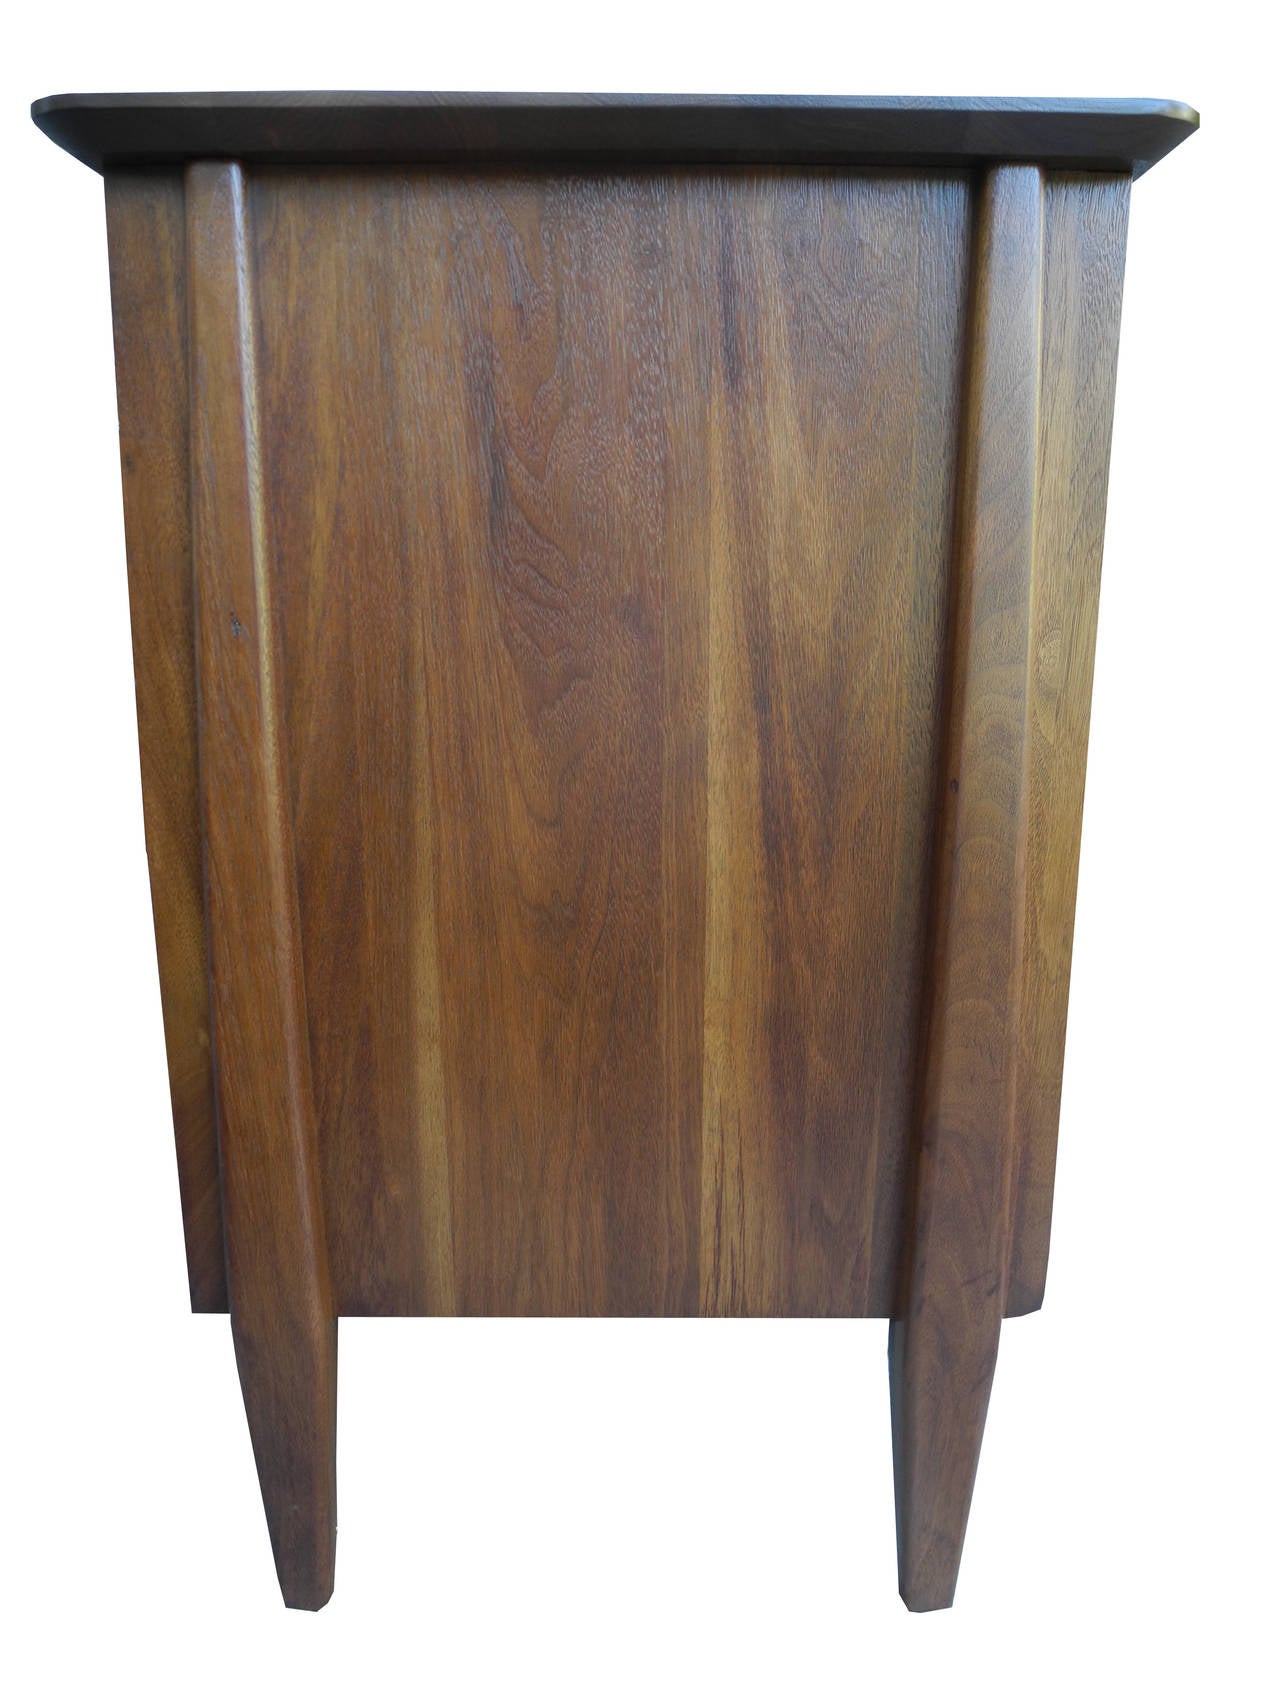 Brass Mid-Century Modern Solid Walnut Nightstands or Bedside Tables with Drawer For Sale